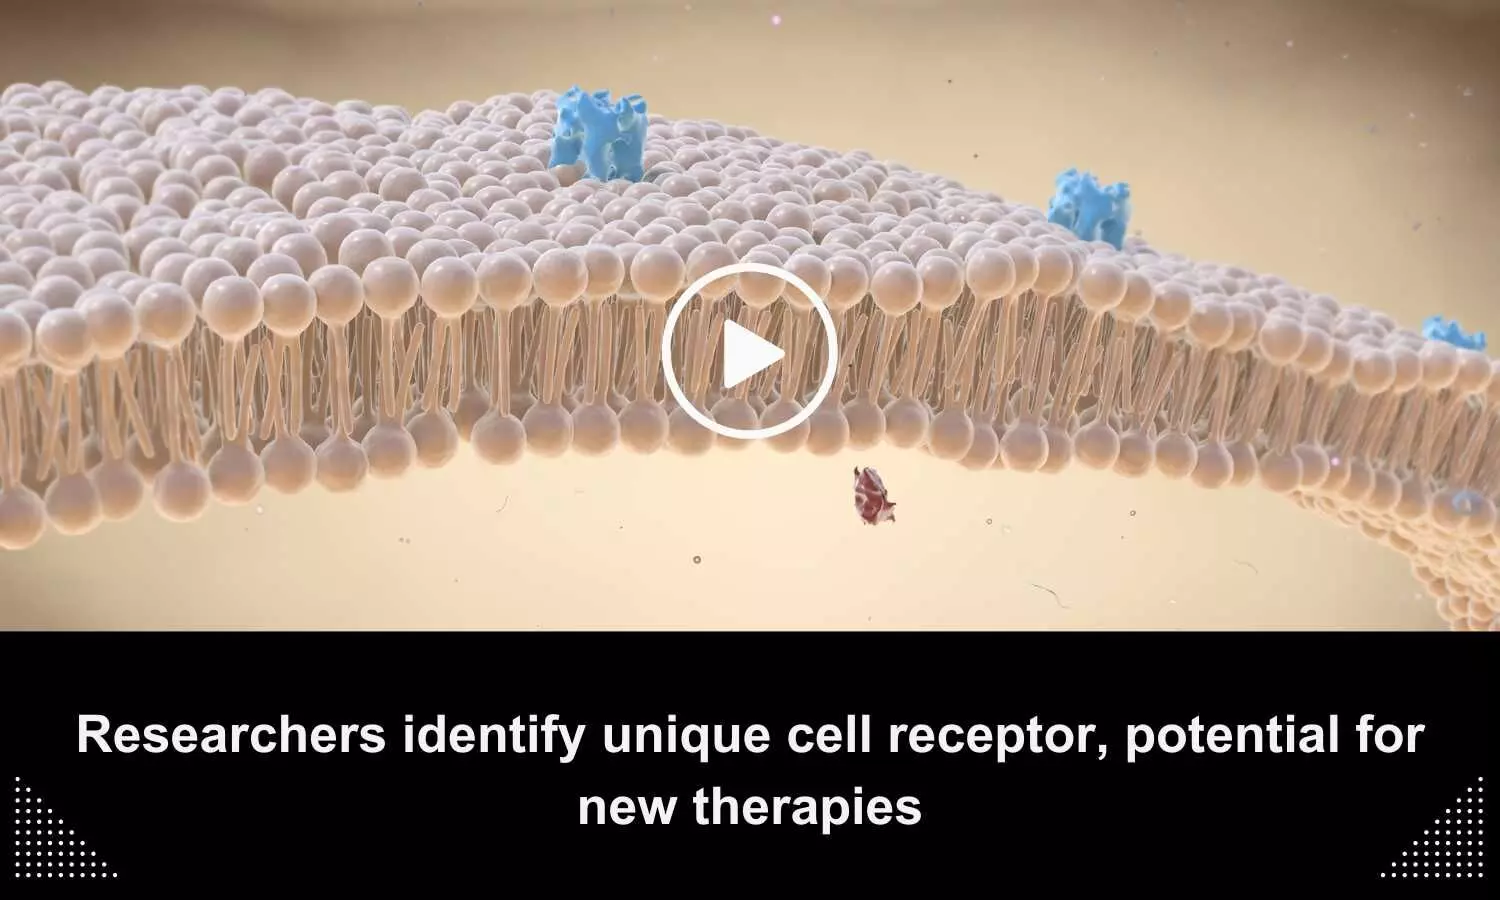 Researchers identify unique cell receptors, potential for new therapies